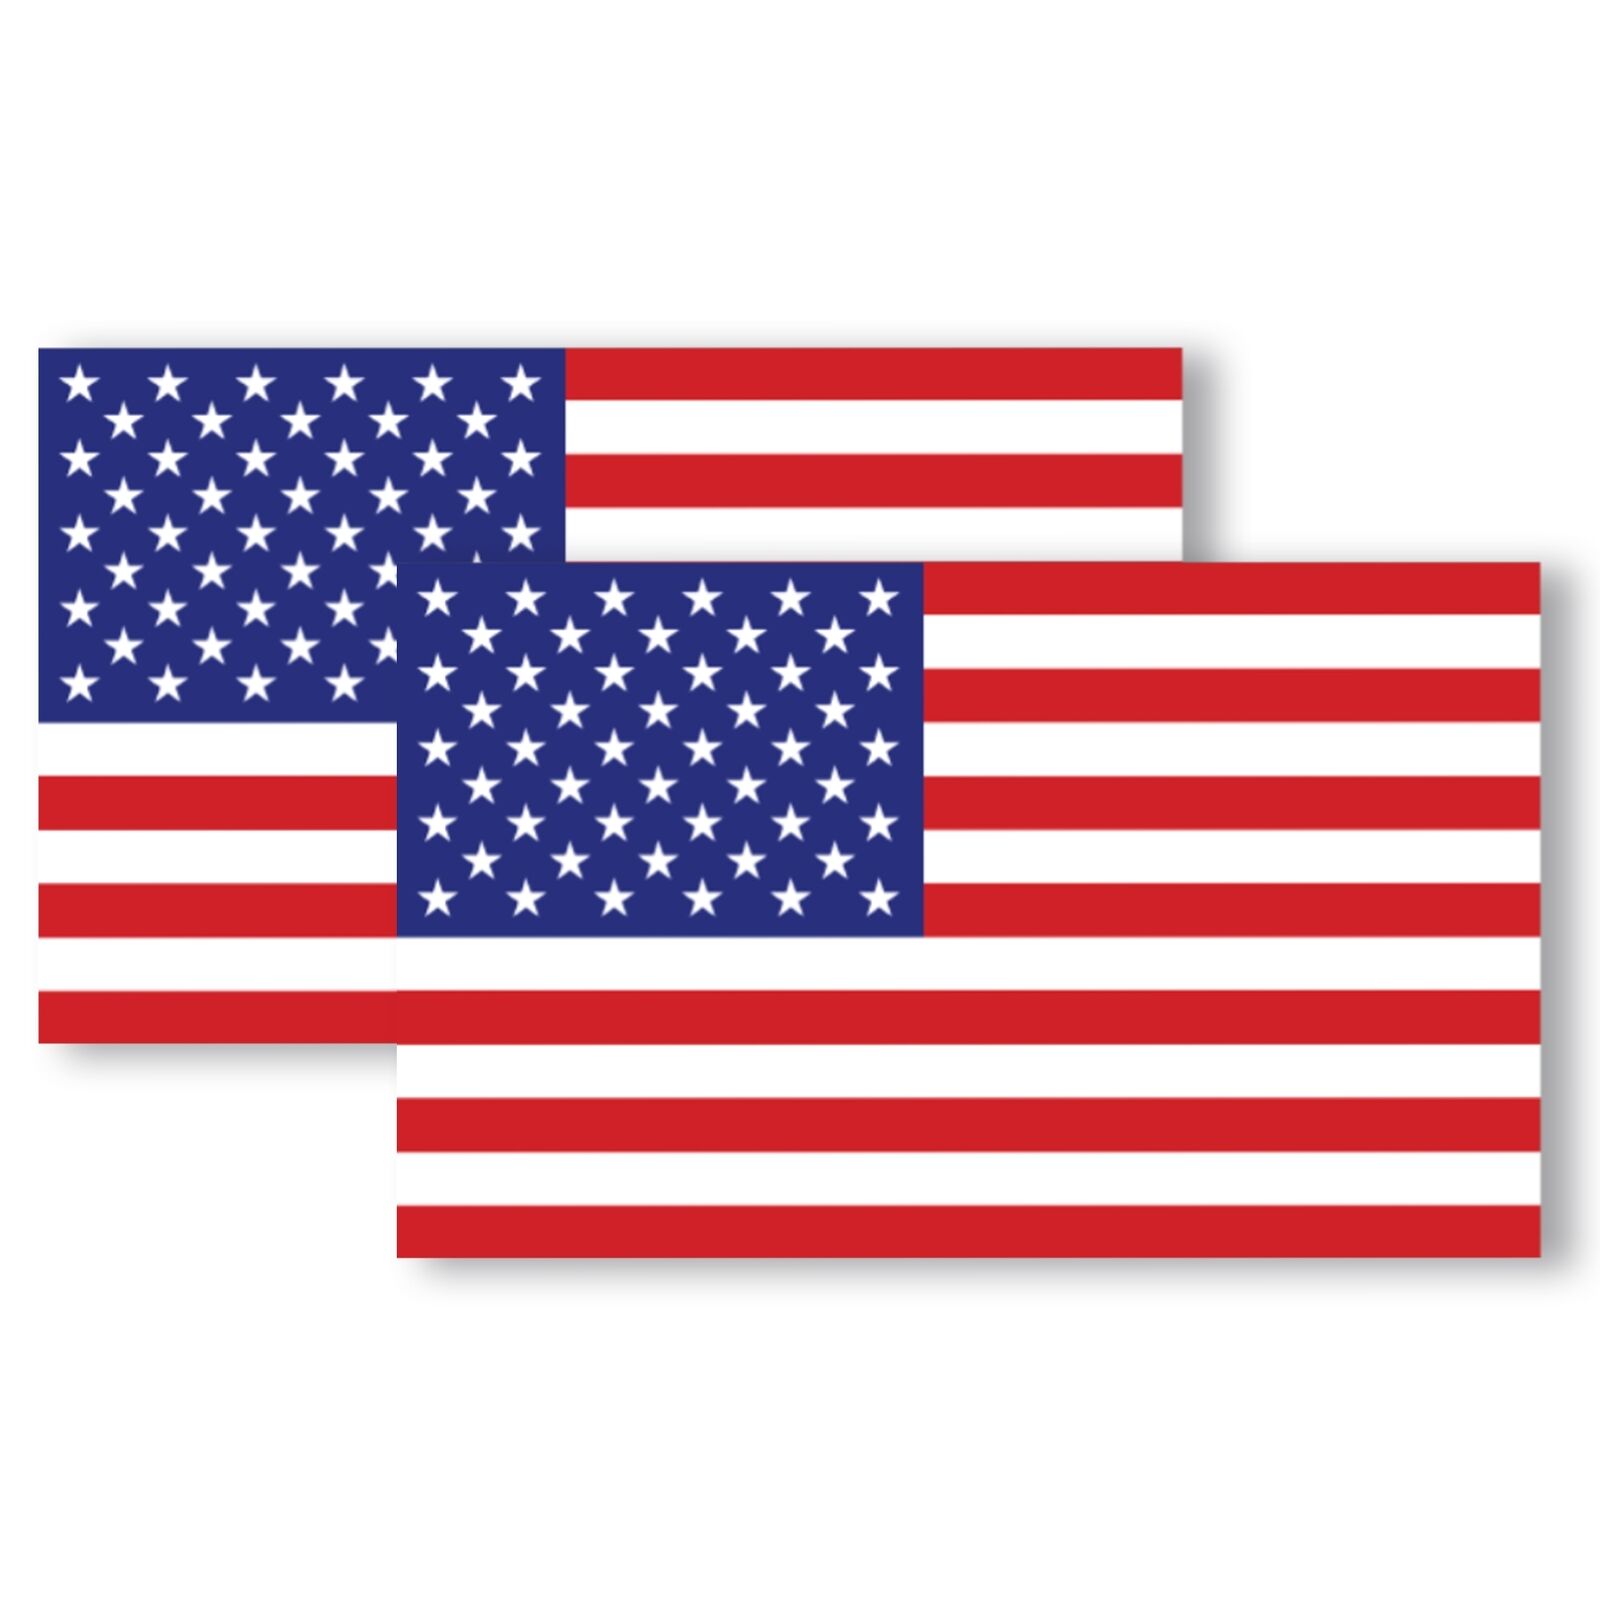 USA Patriotic American Flag Adhesive Decal Sticker, 2 Pack, 3x5 Inch